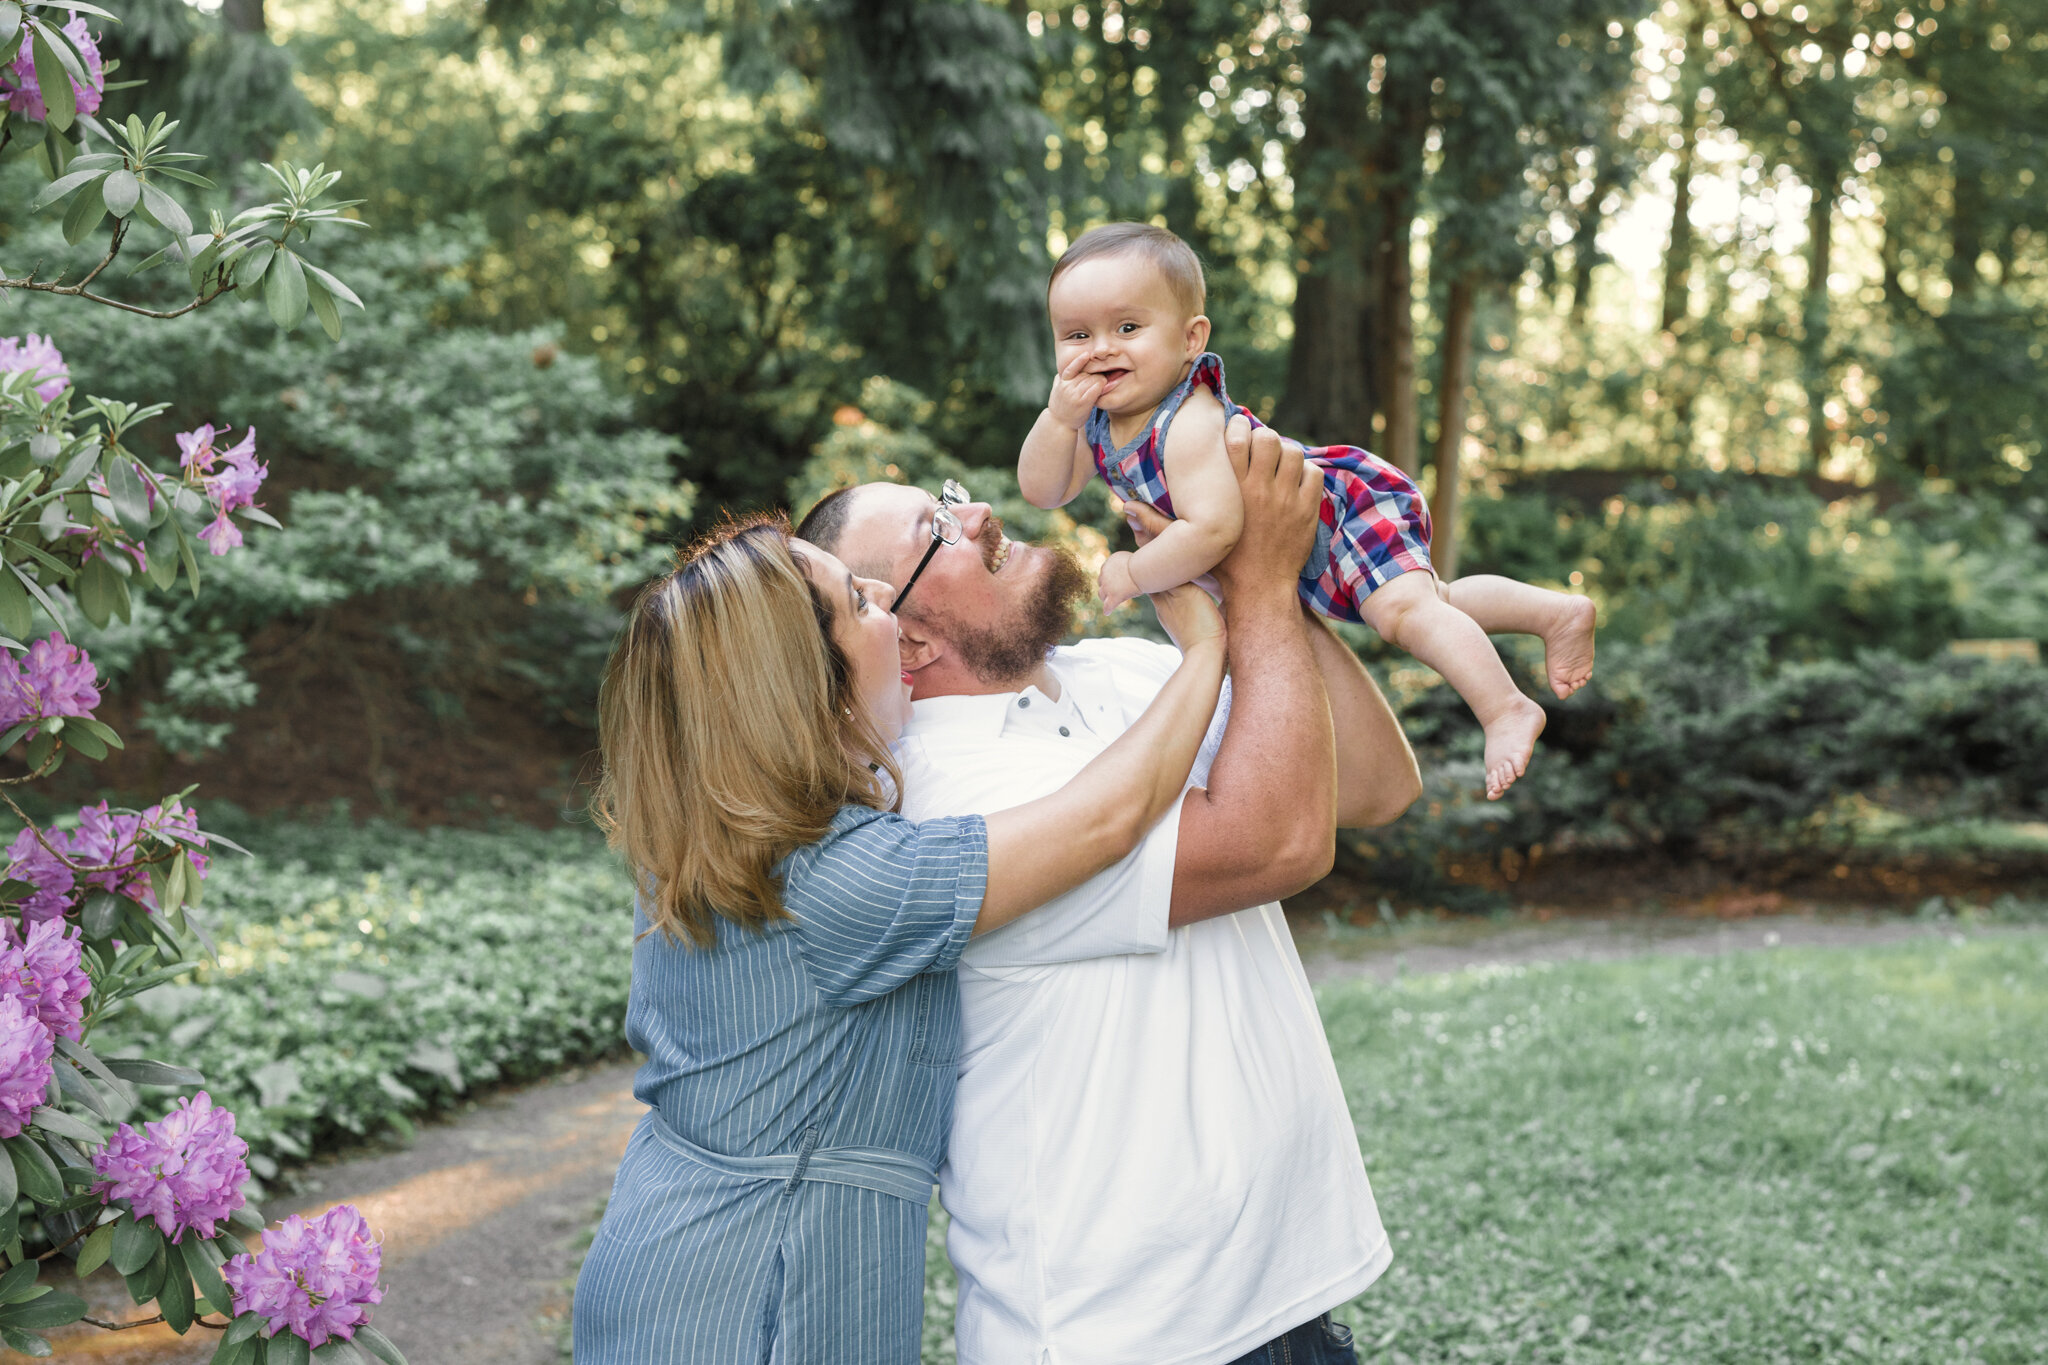 Summer_Family_Session_Group_Portrait_Baby_Family_Milestone_with_Family_Photographer_Christie_Leigh_Photo_Buhl_Farm_Park_Hermitage_PA_Mercer_County-1.JPG